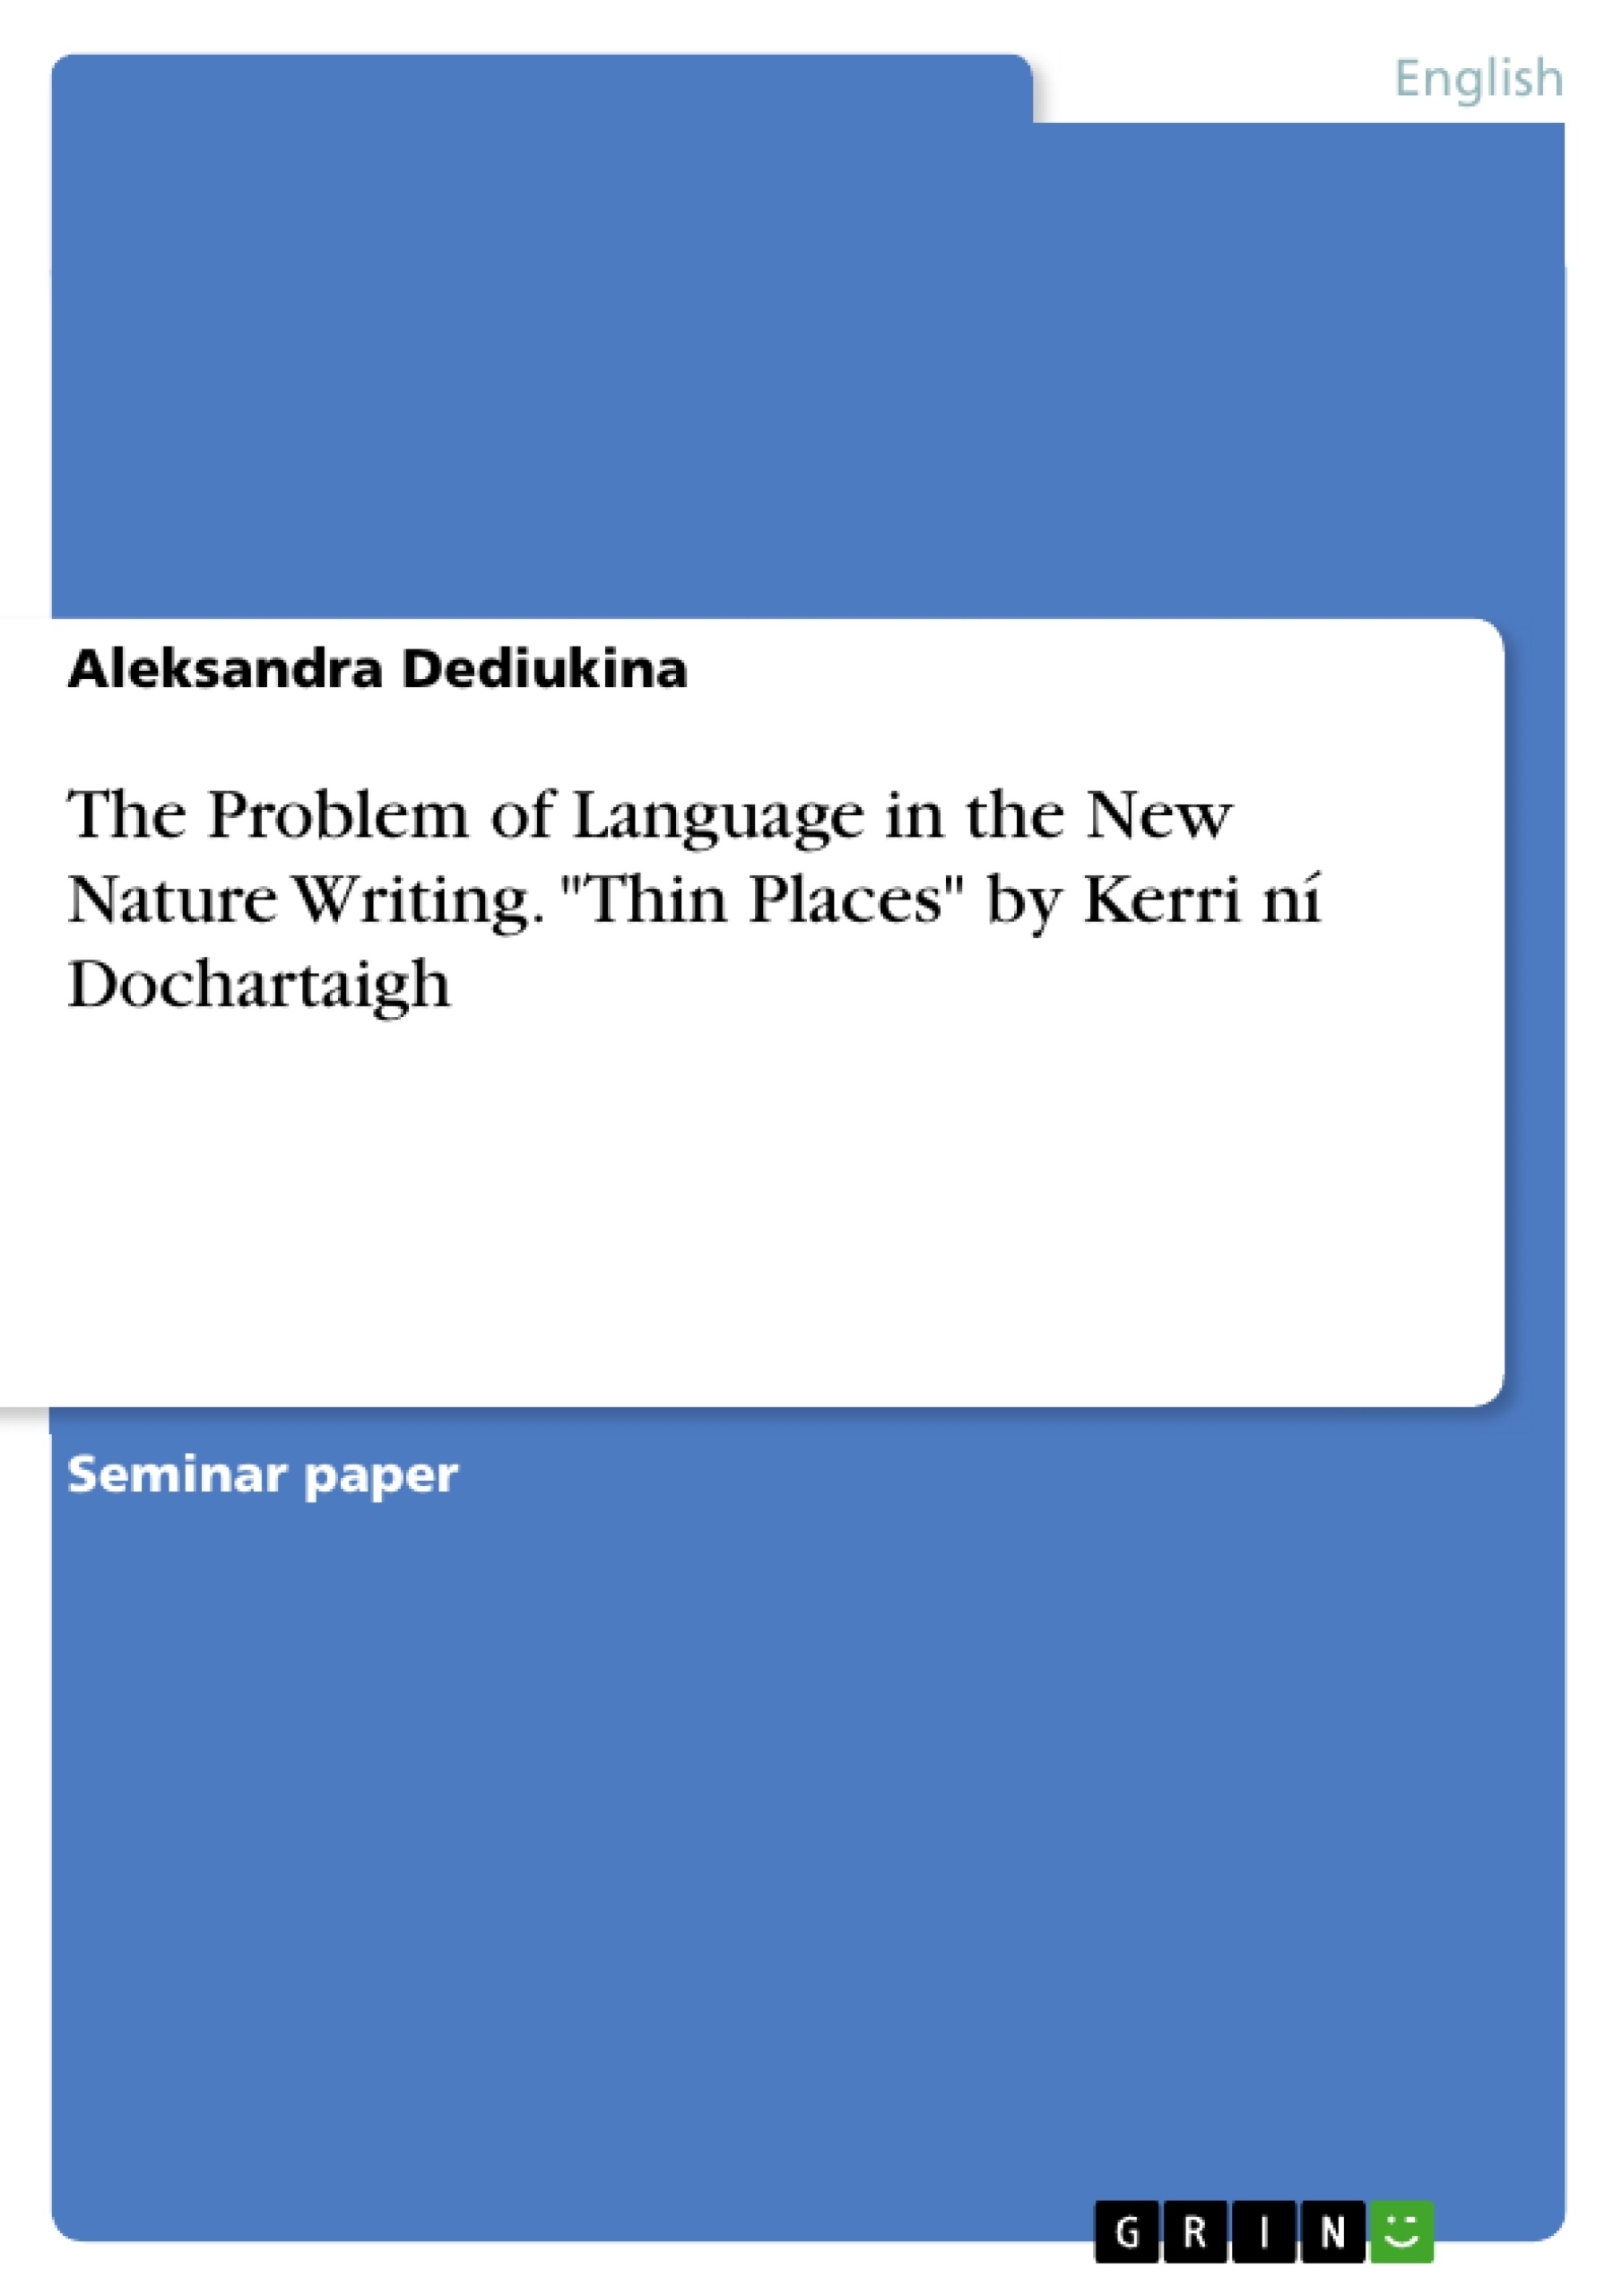 Title: The Problem of Language in the New Nature Writing. "Thin Places" by Kerri ní Dochartaigh